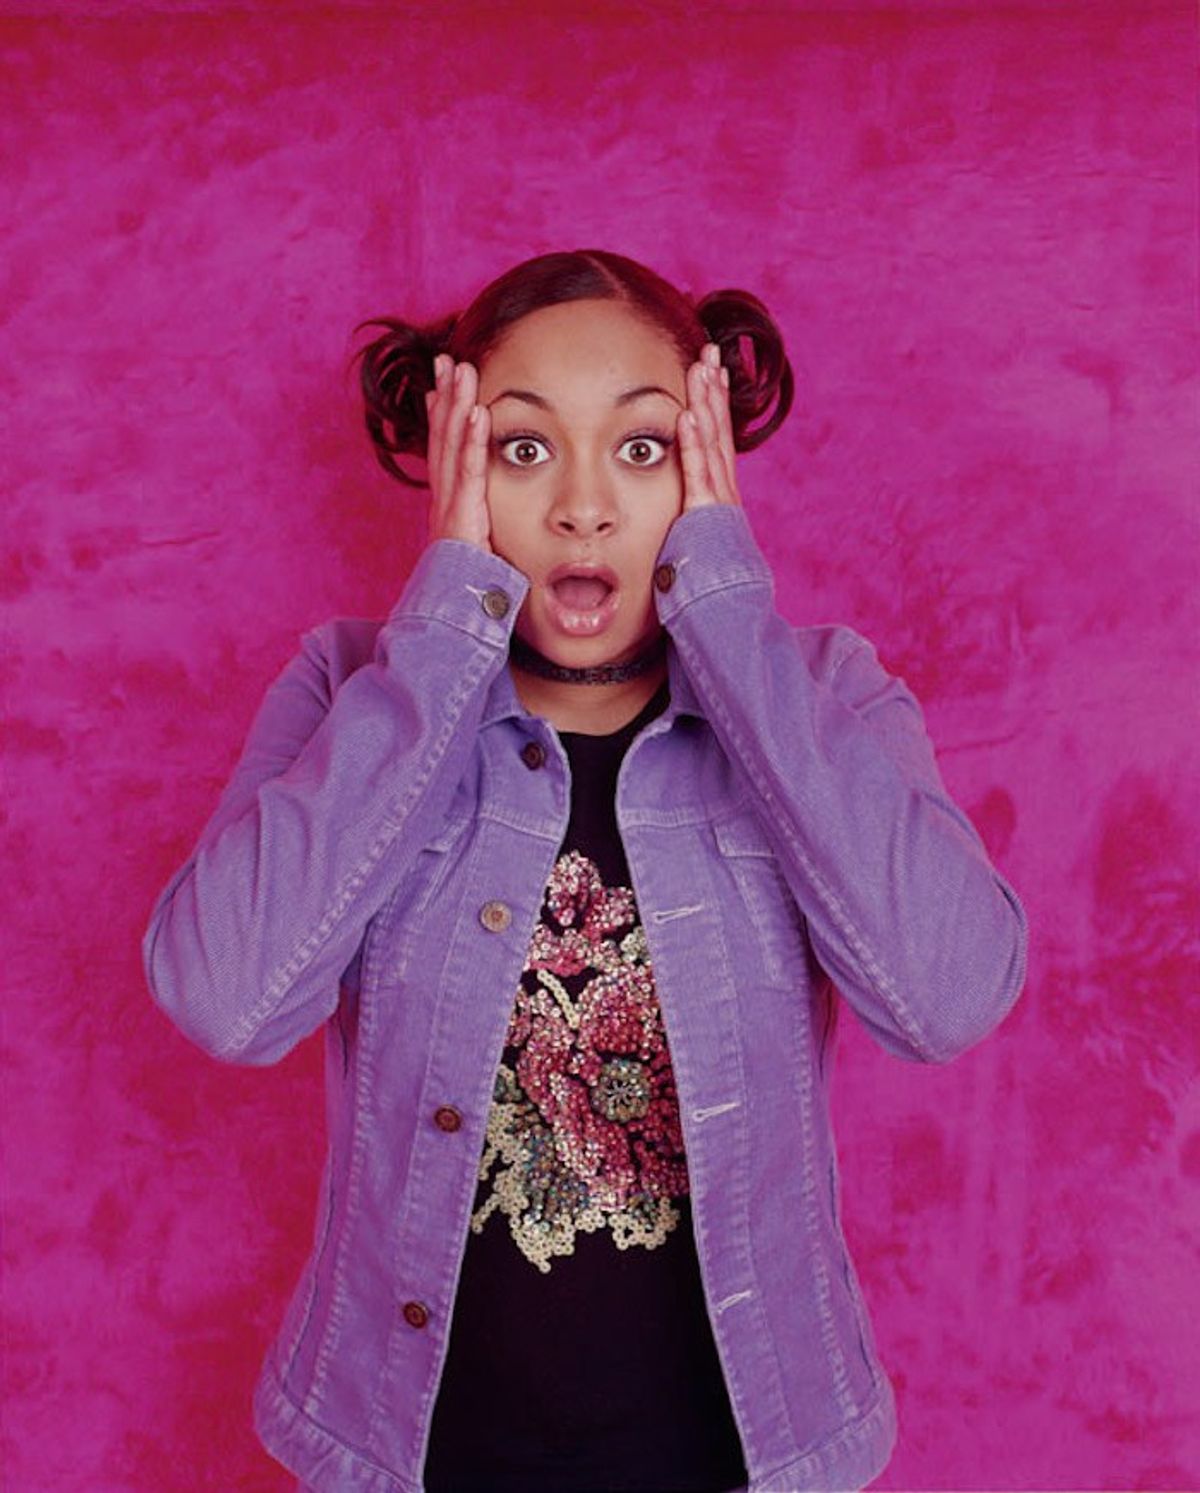 Going Back To School After Break, As Told By Raven Baxter